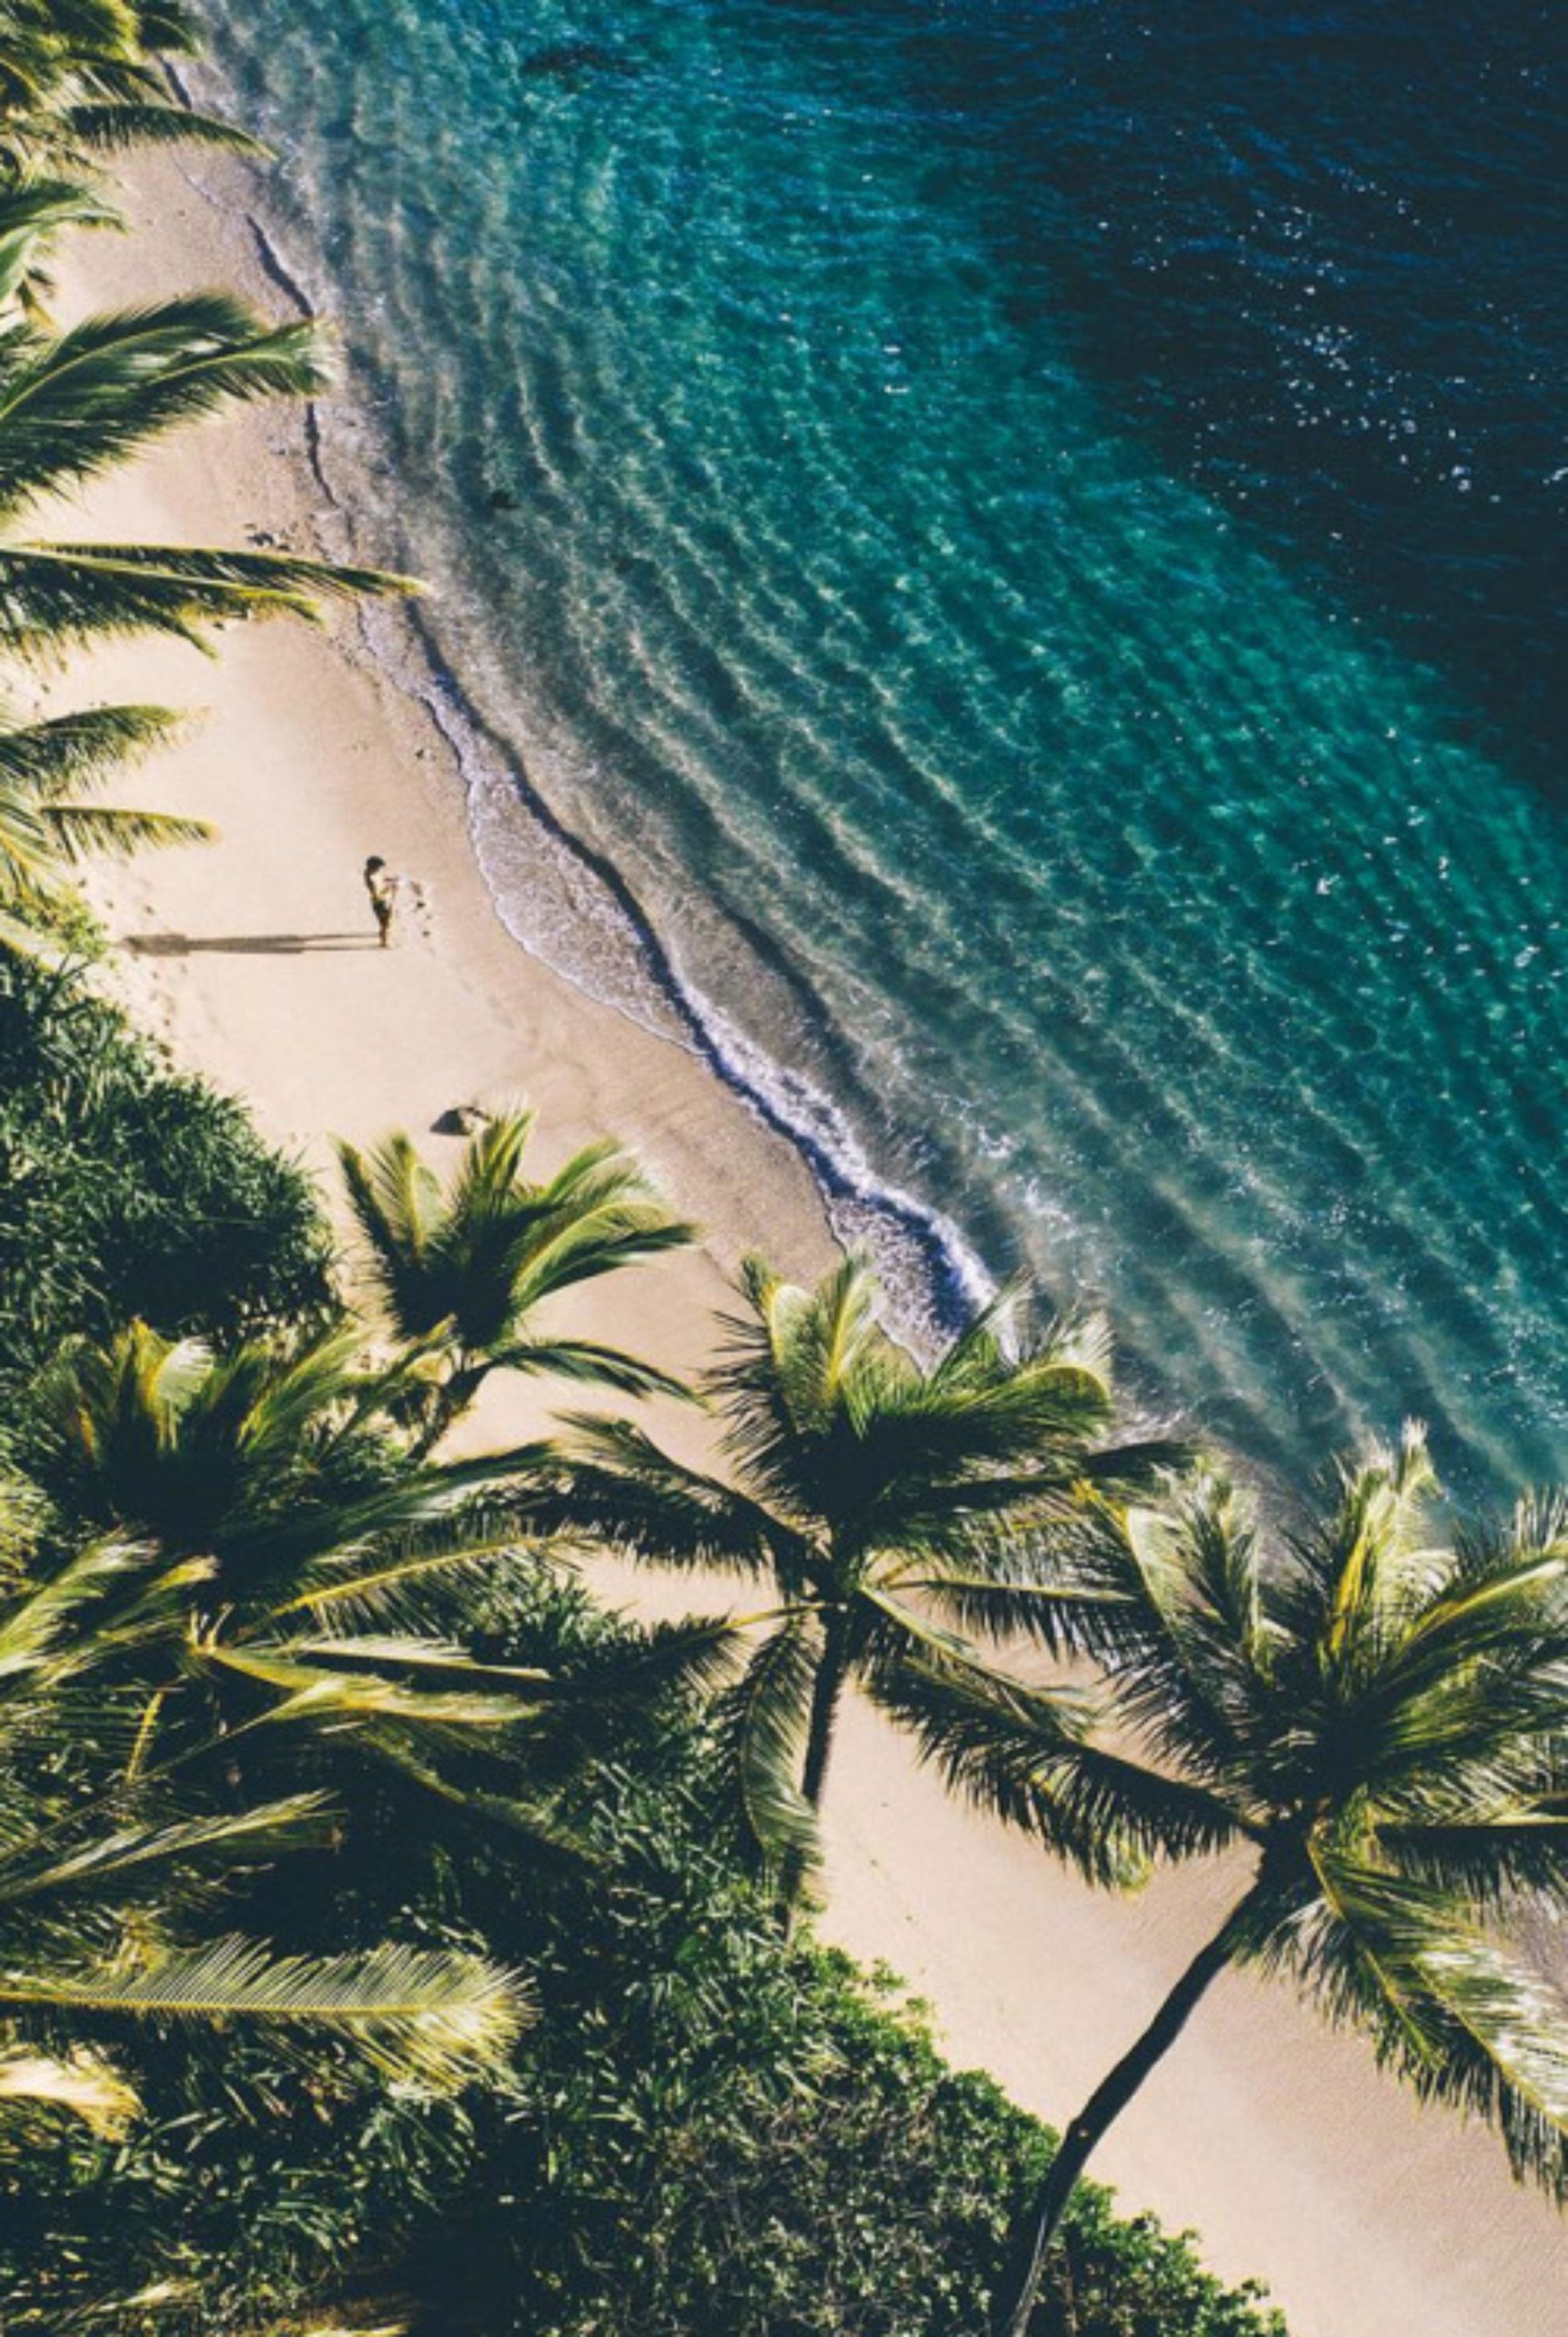 Ocean And Palm Tree - HD Wallpaper 